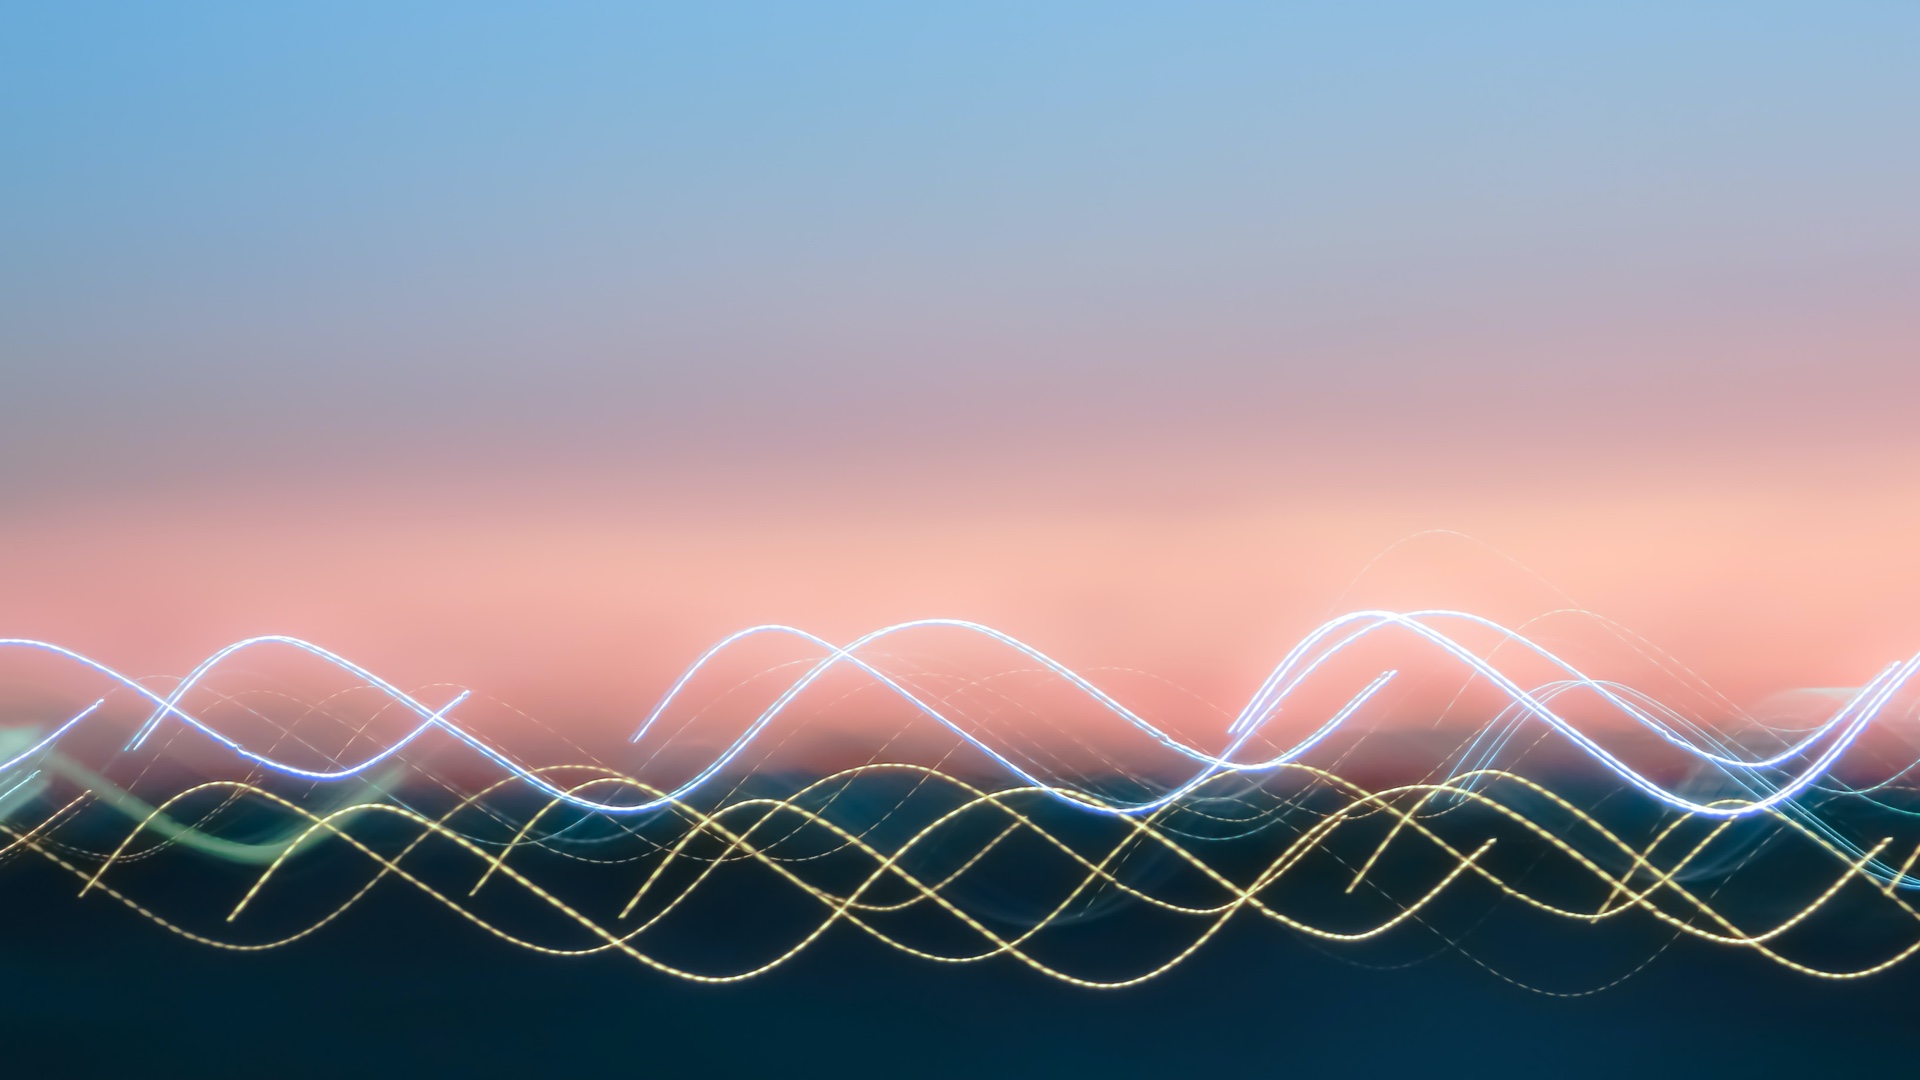 Image of blue and yellow sound waves going across a blurred sunset background